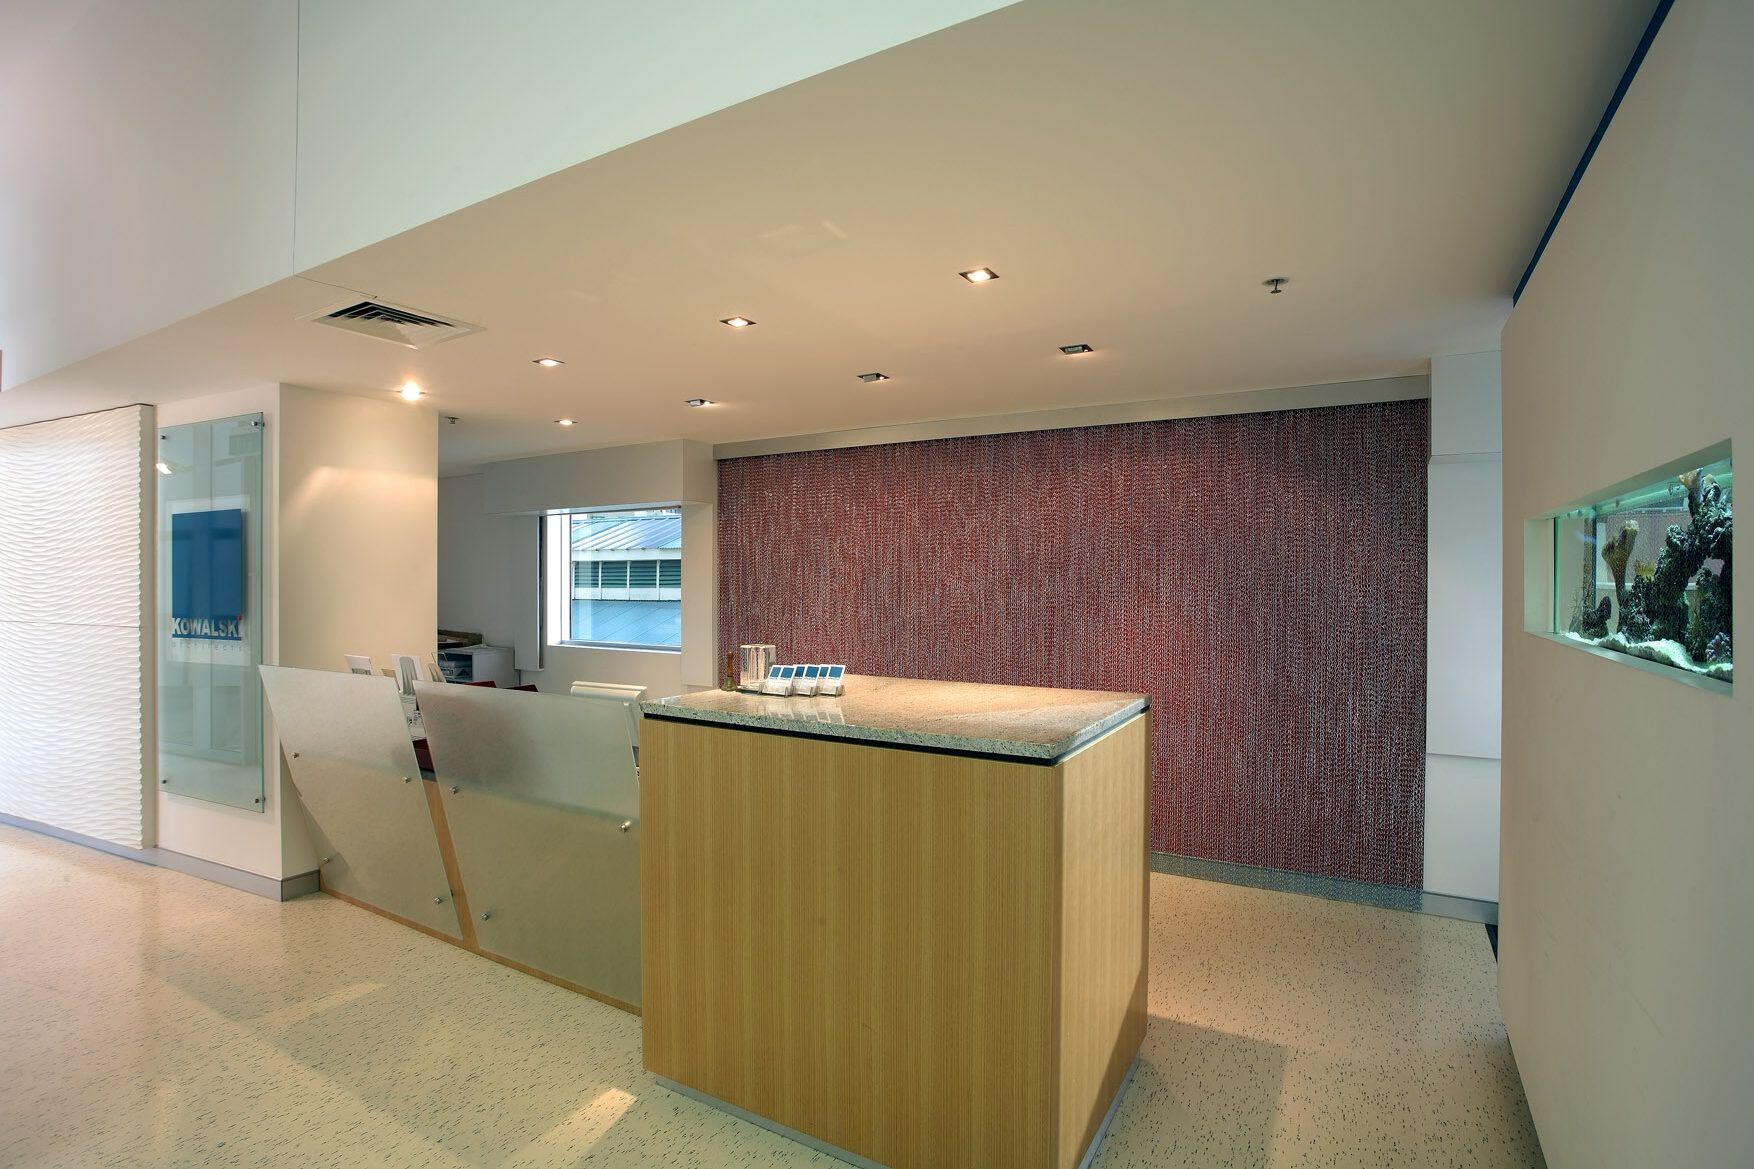 Office lobby with a timber and glass reception desk, inset aquarium, and a feature red wall covered in chains.